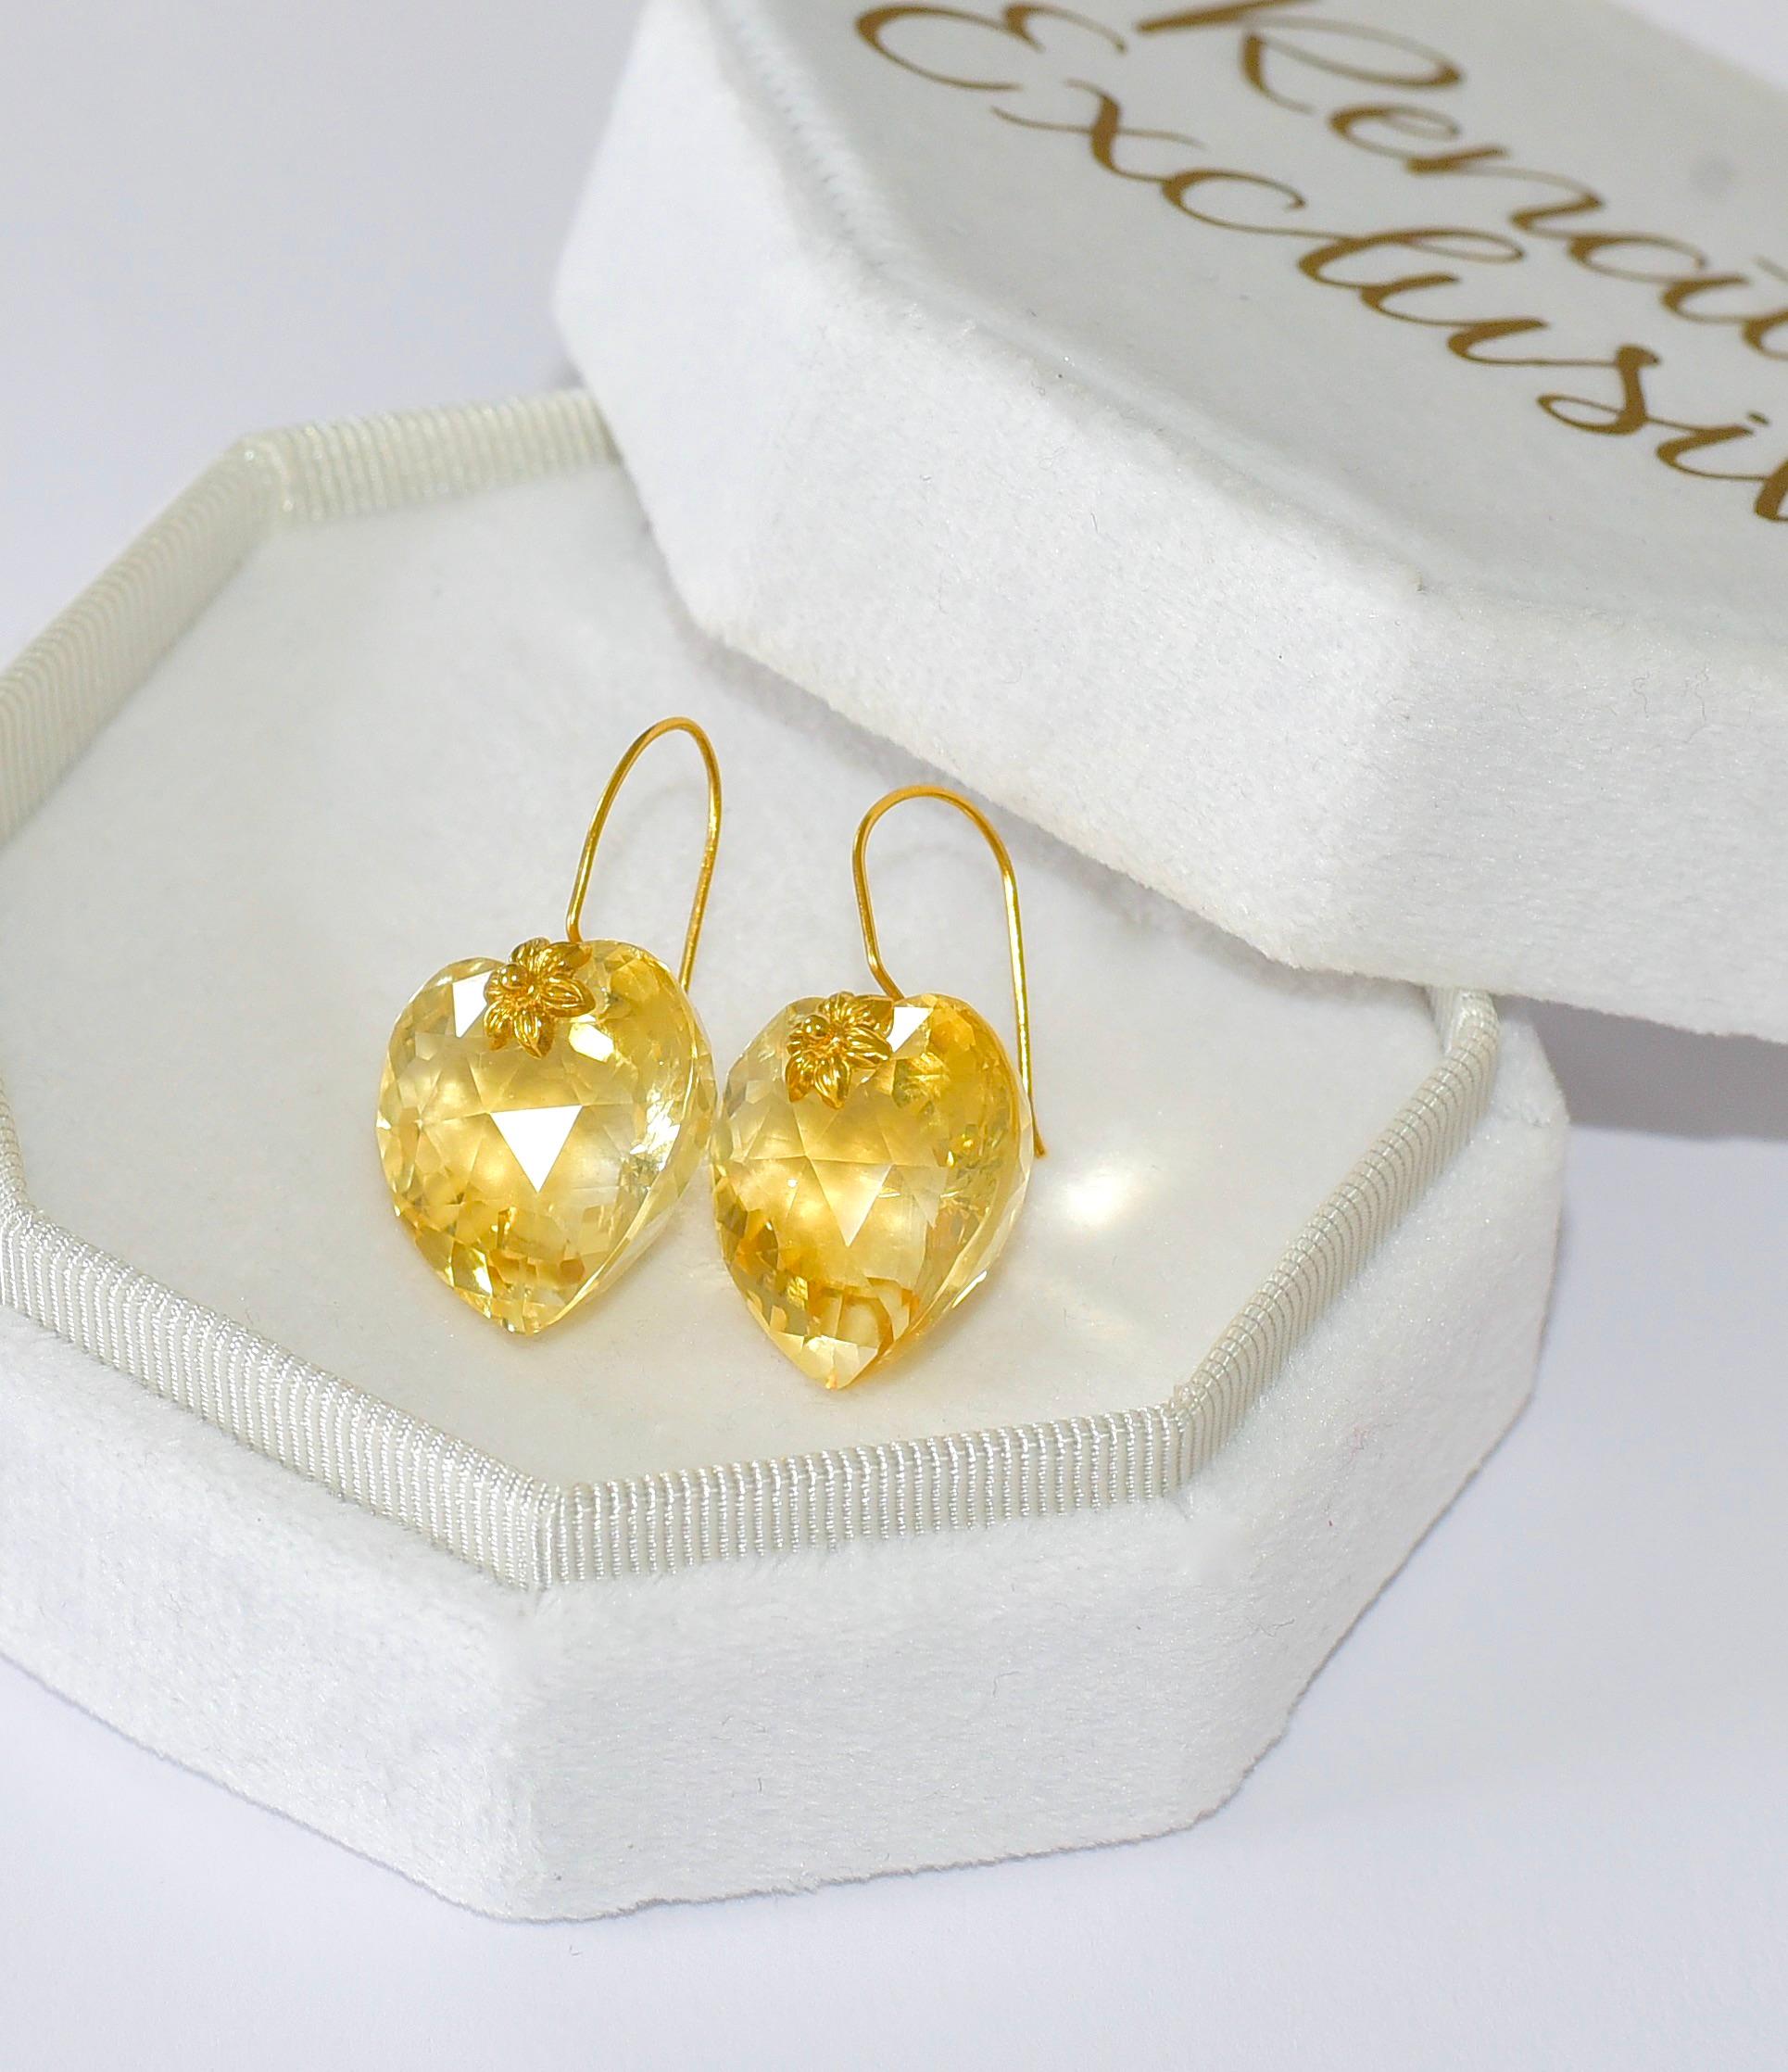 This unique pair of lab-created African Lemon Quartz (19mm x 20mm) earrings are like a goddess! 18K Solid yellow Gold delicate details give the earrings a feminine look. Simple sophistication for your everyday accessories! The perfect gift for the